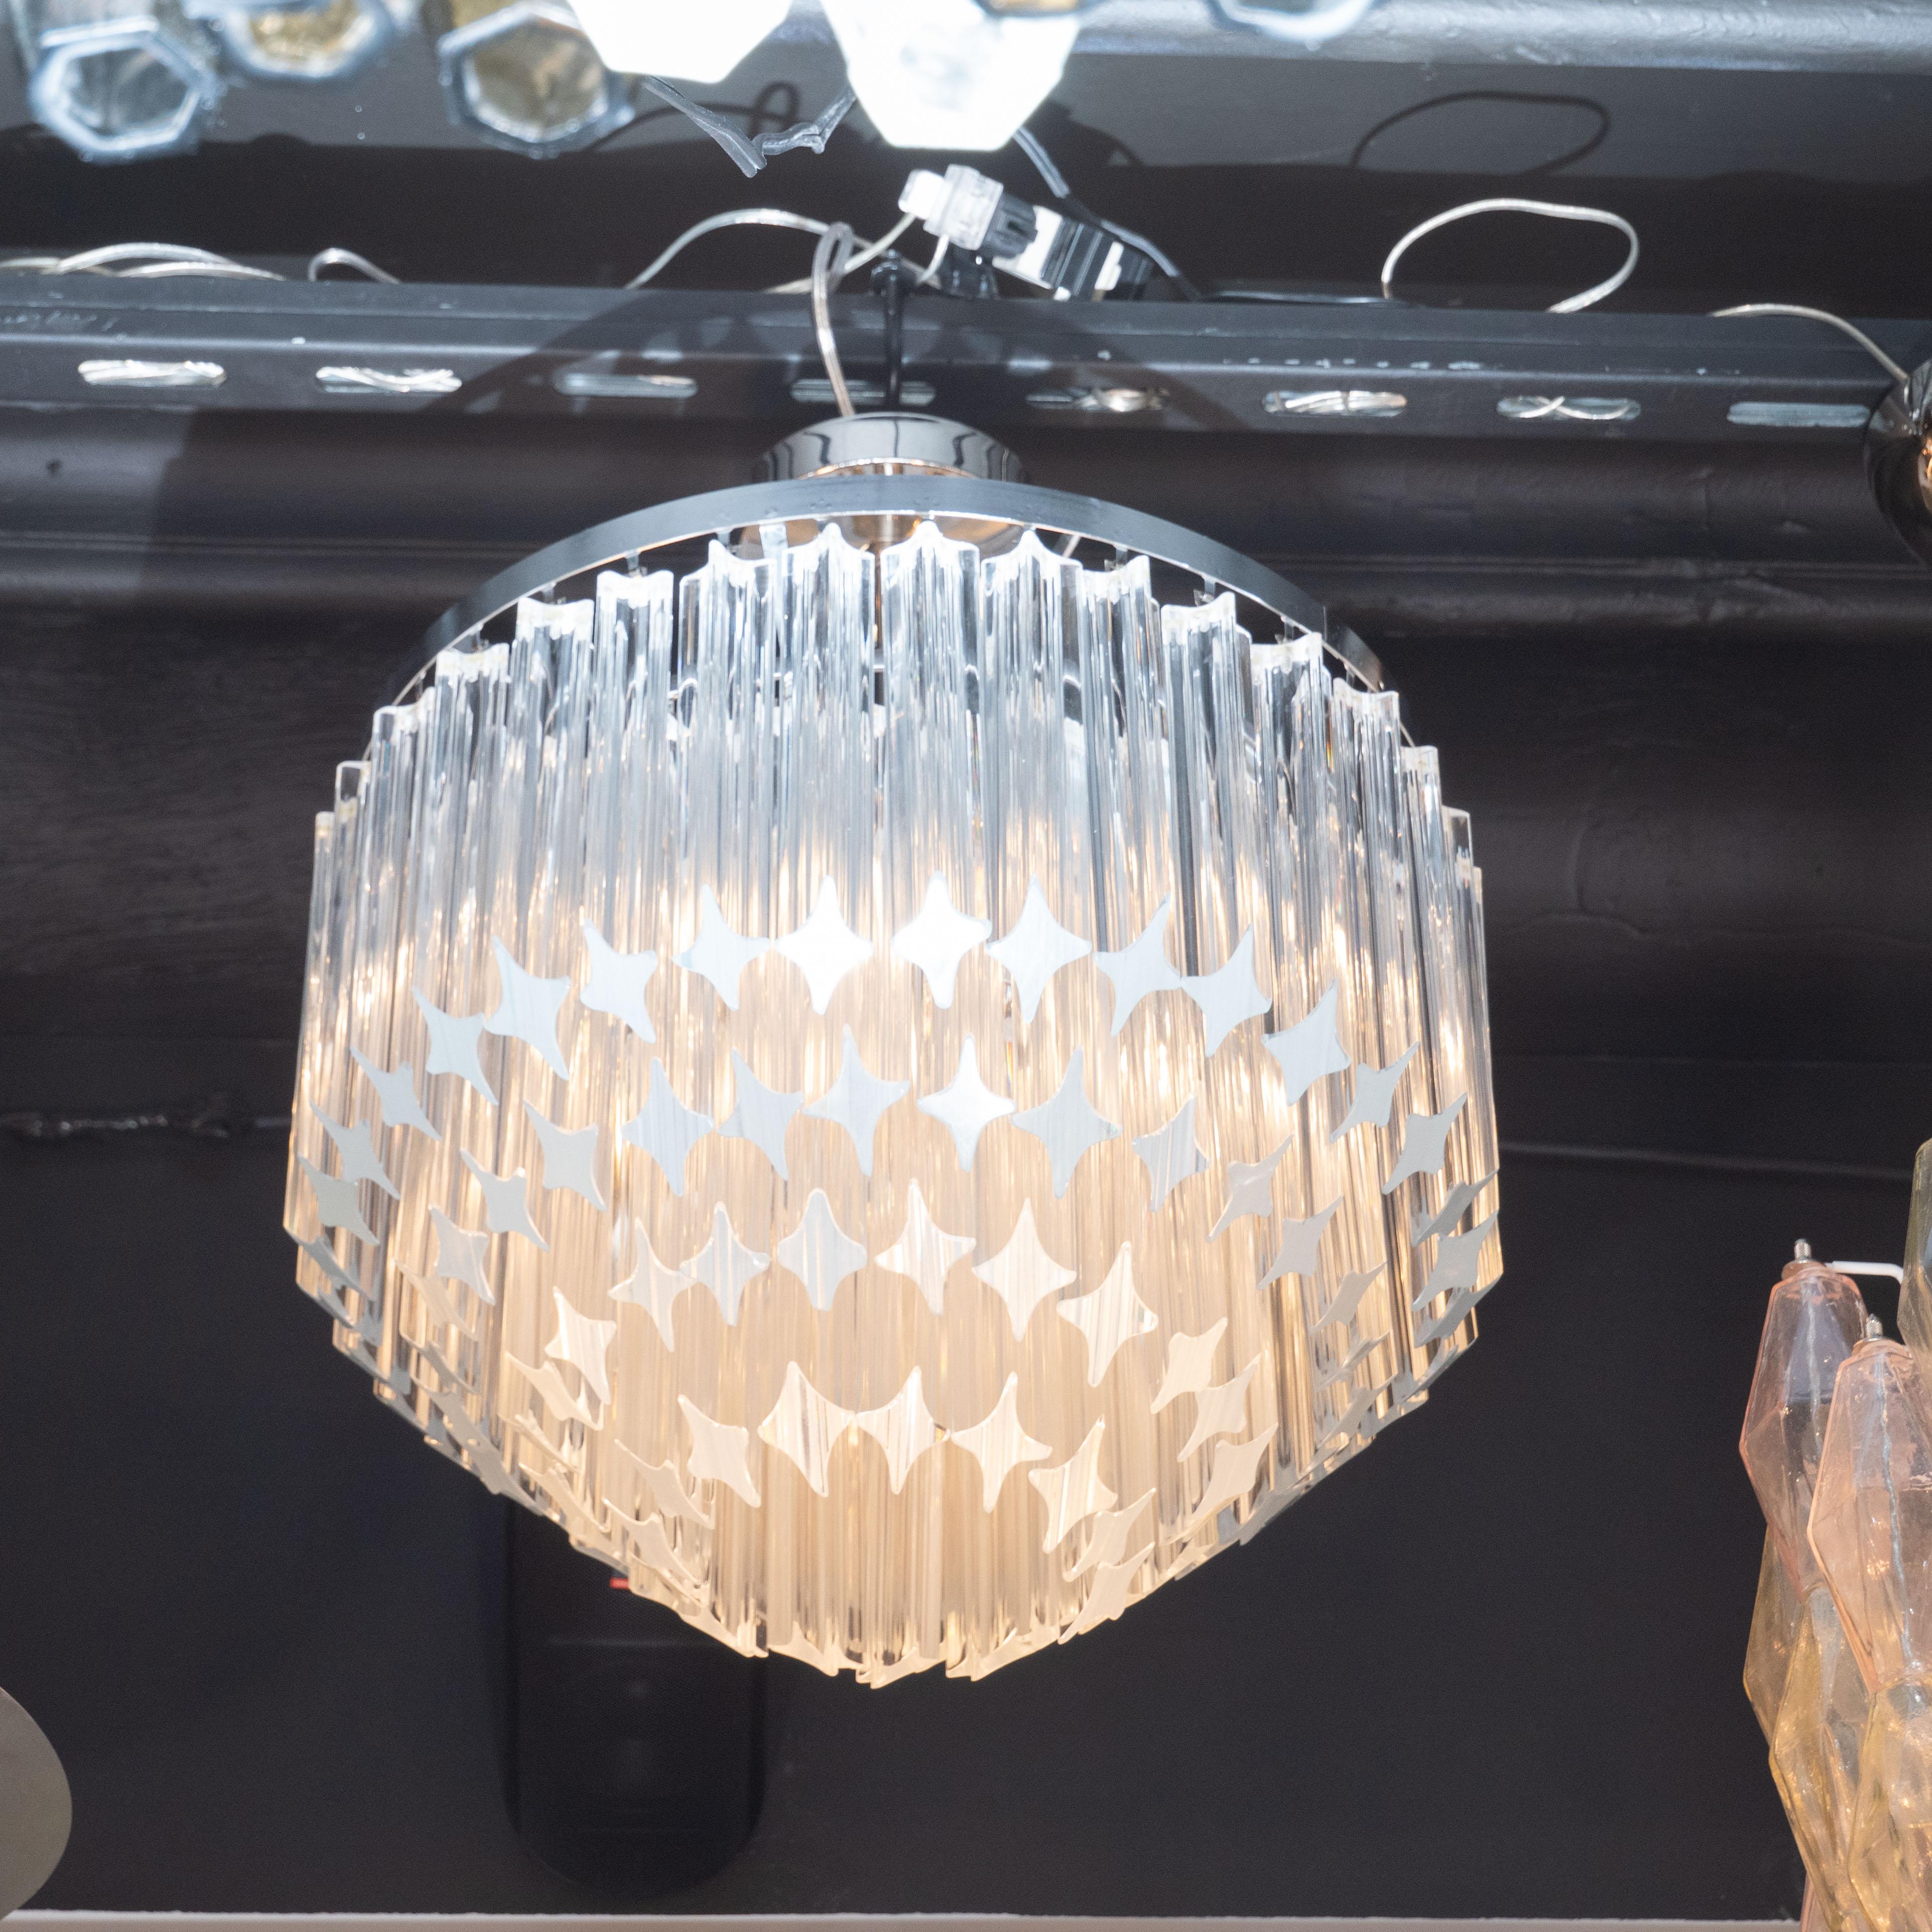 This refined chandelier was realized in Italy, circa 1970. It features an abundance of camer crystals hanging from concentric circular form in polished chrome. The geometric form of the crystals offers a dynamic counterpoint to the circular frame,